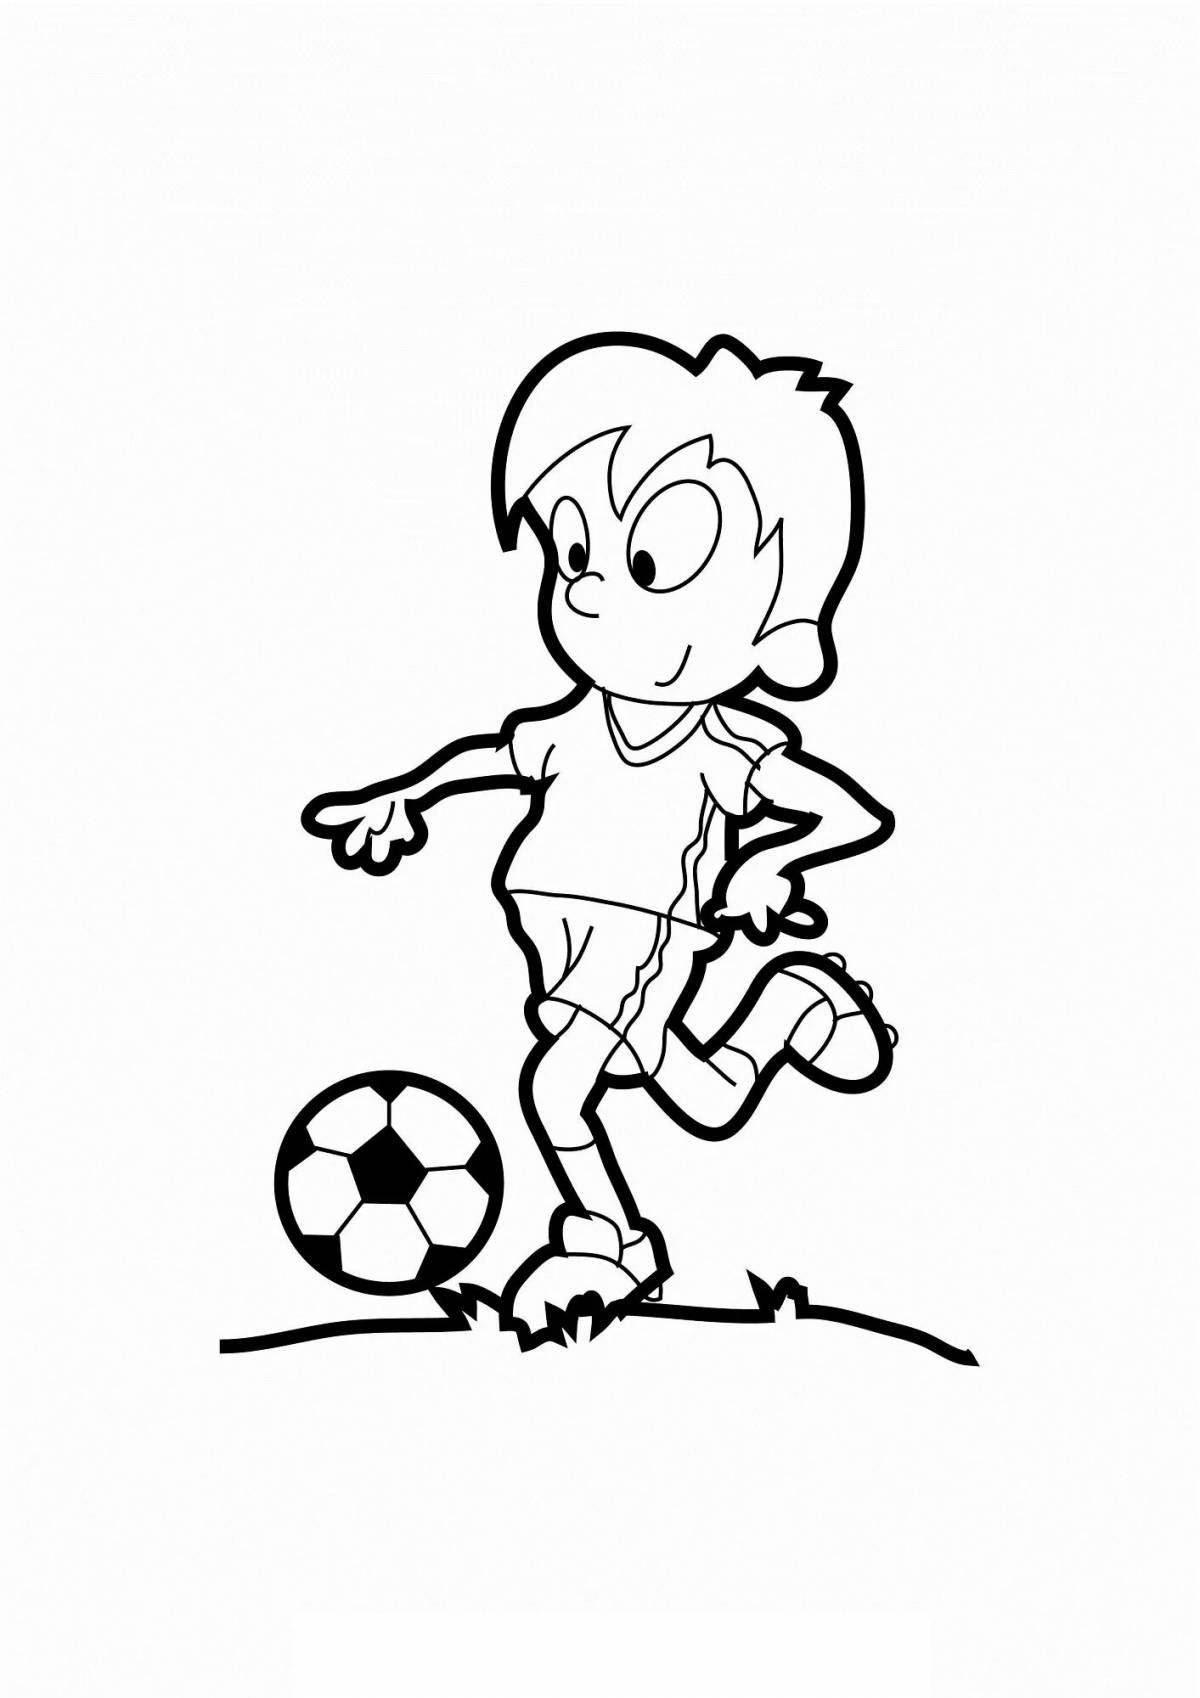 Animated soccer boy coloring page